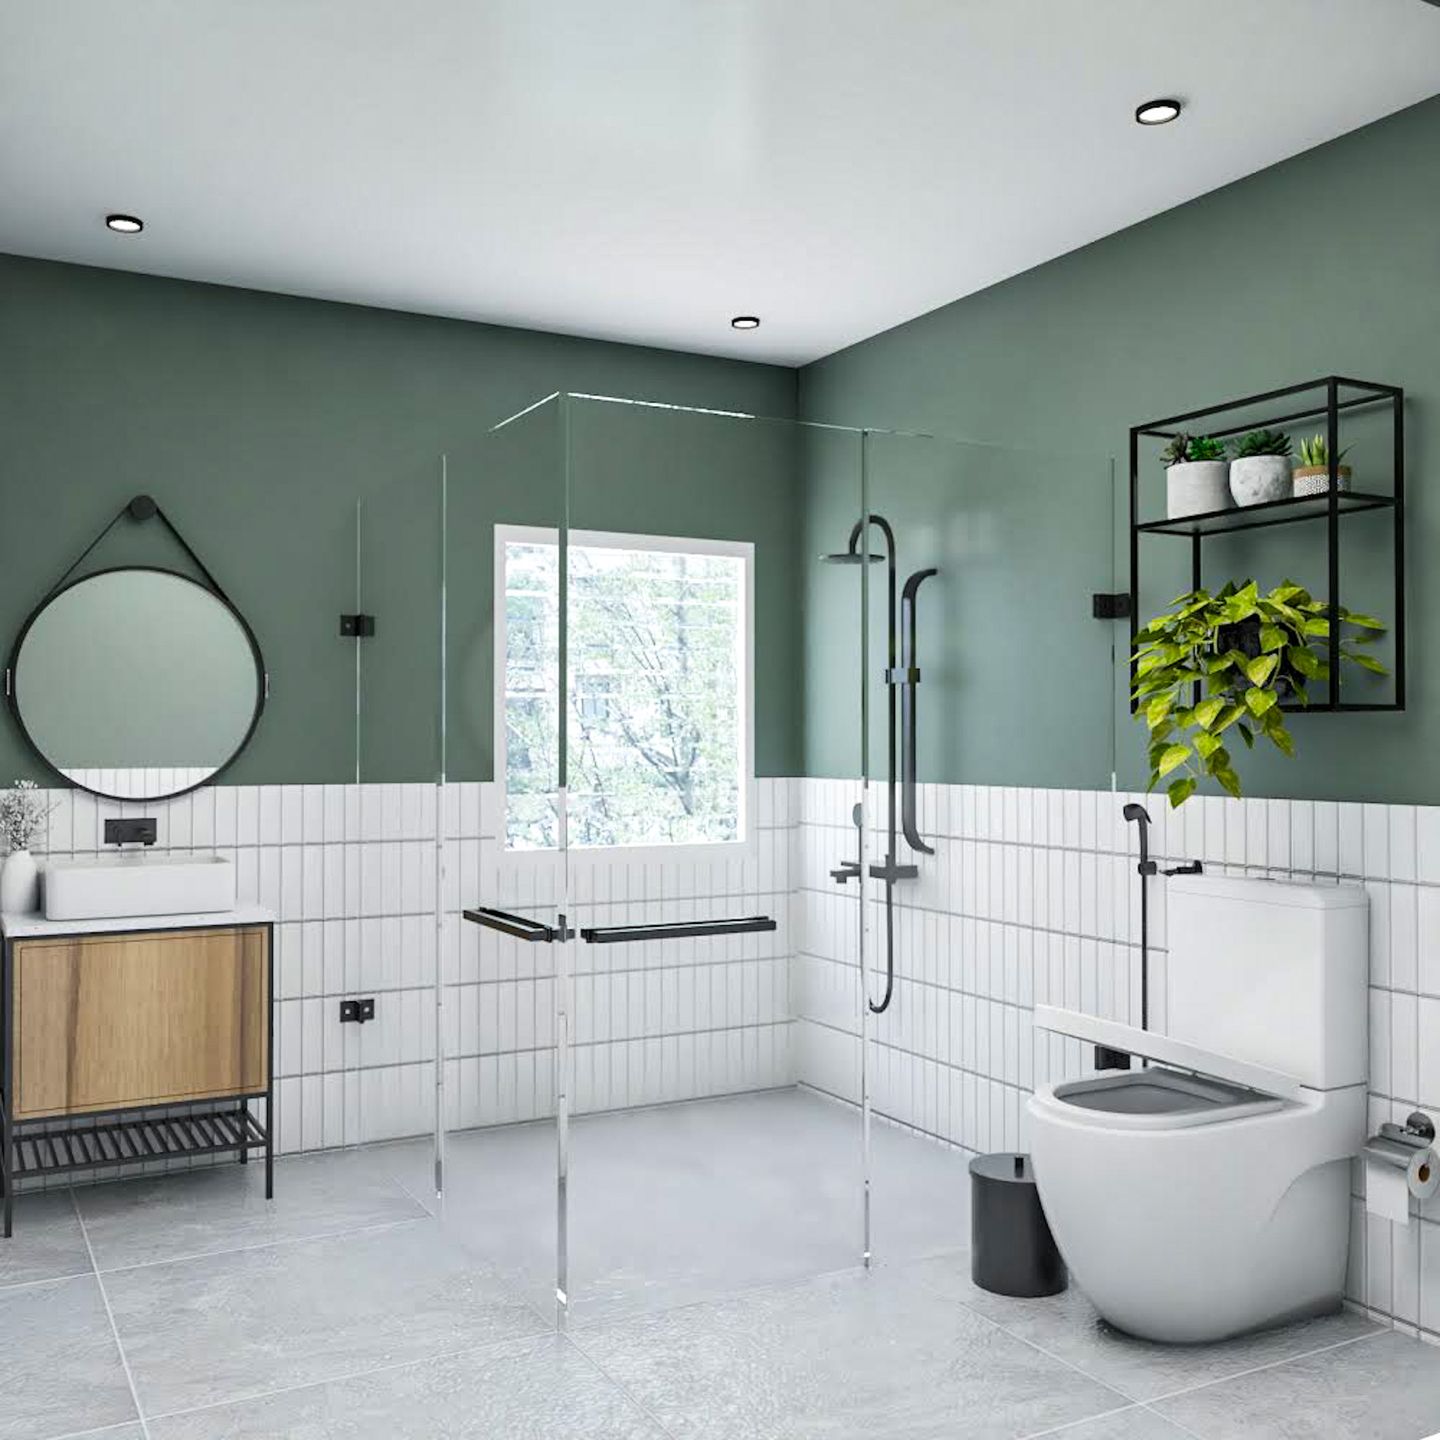 Olive Green Wall Paint Design For Bathrooms - Livspace